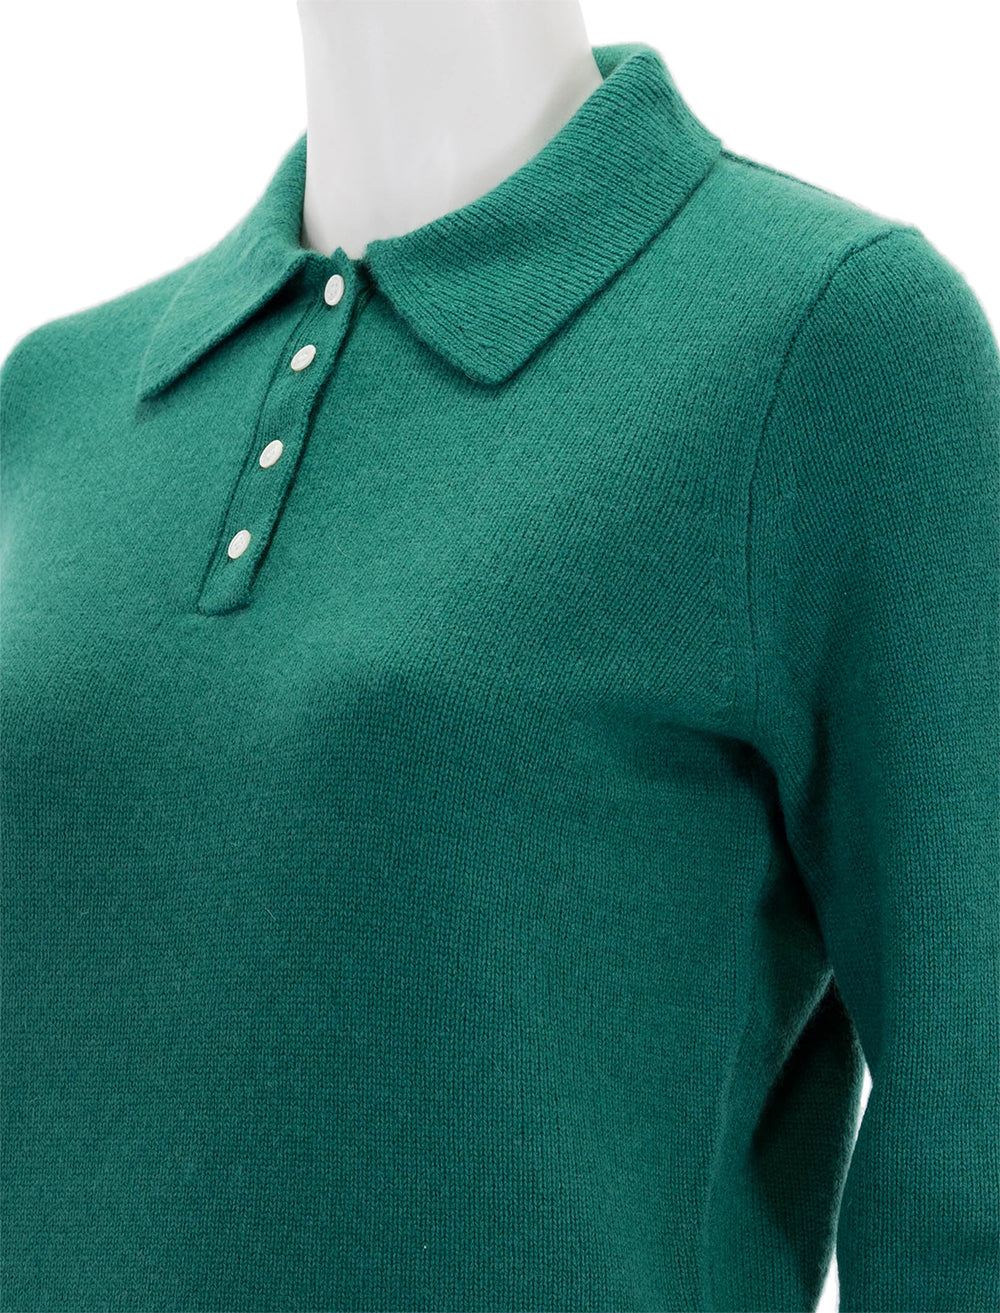 Close-up view of Alex Mill's cashmere alice polo sweater in kelly green.